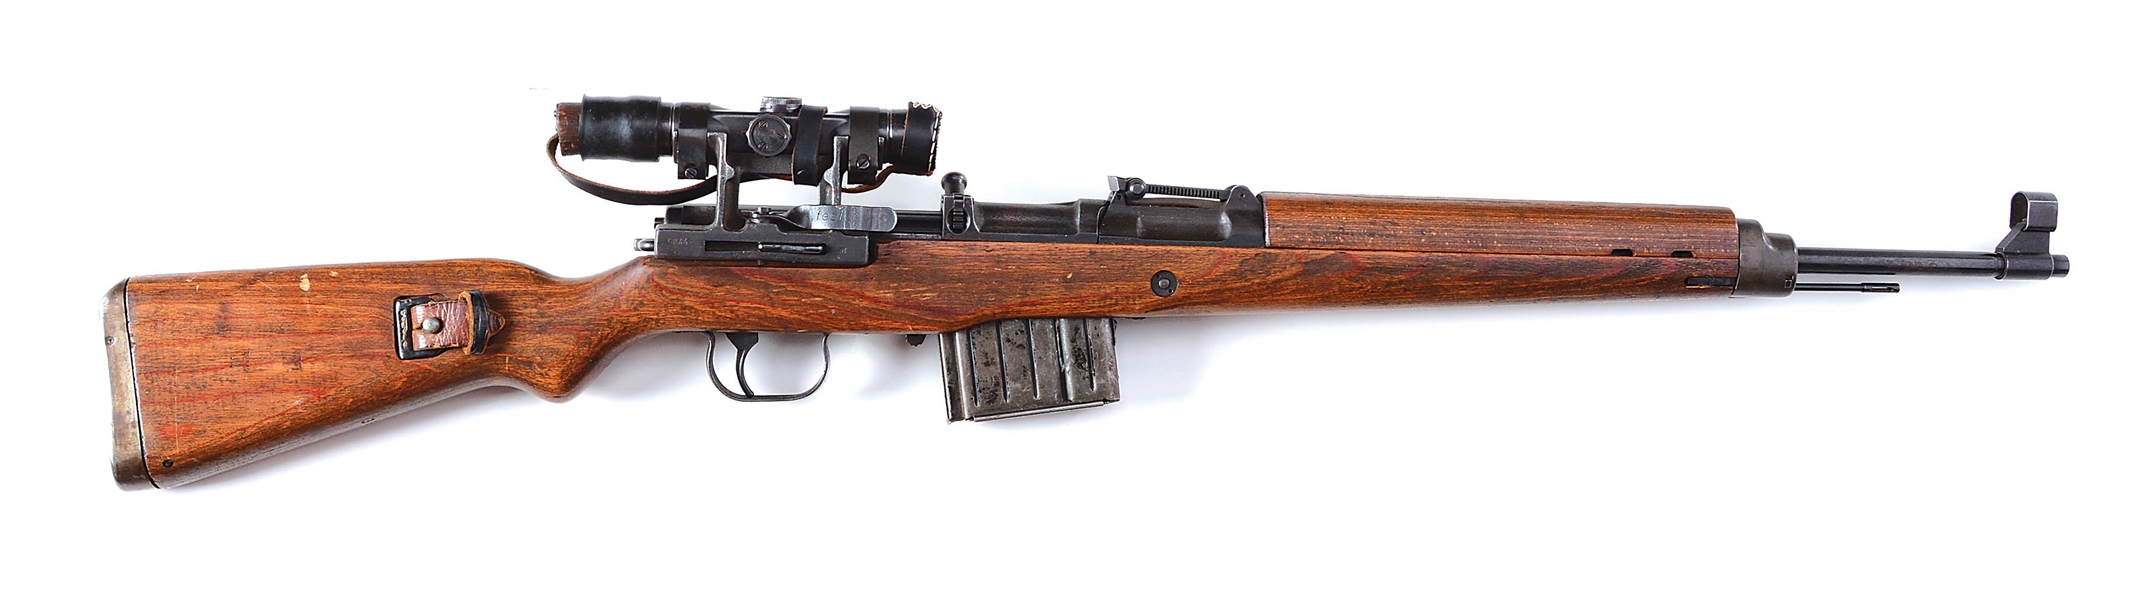 (C) K43 RIFLE WITH MOUNTED SCOPE SNIPERS RIFLE.